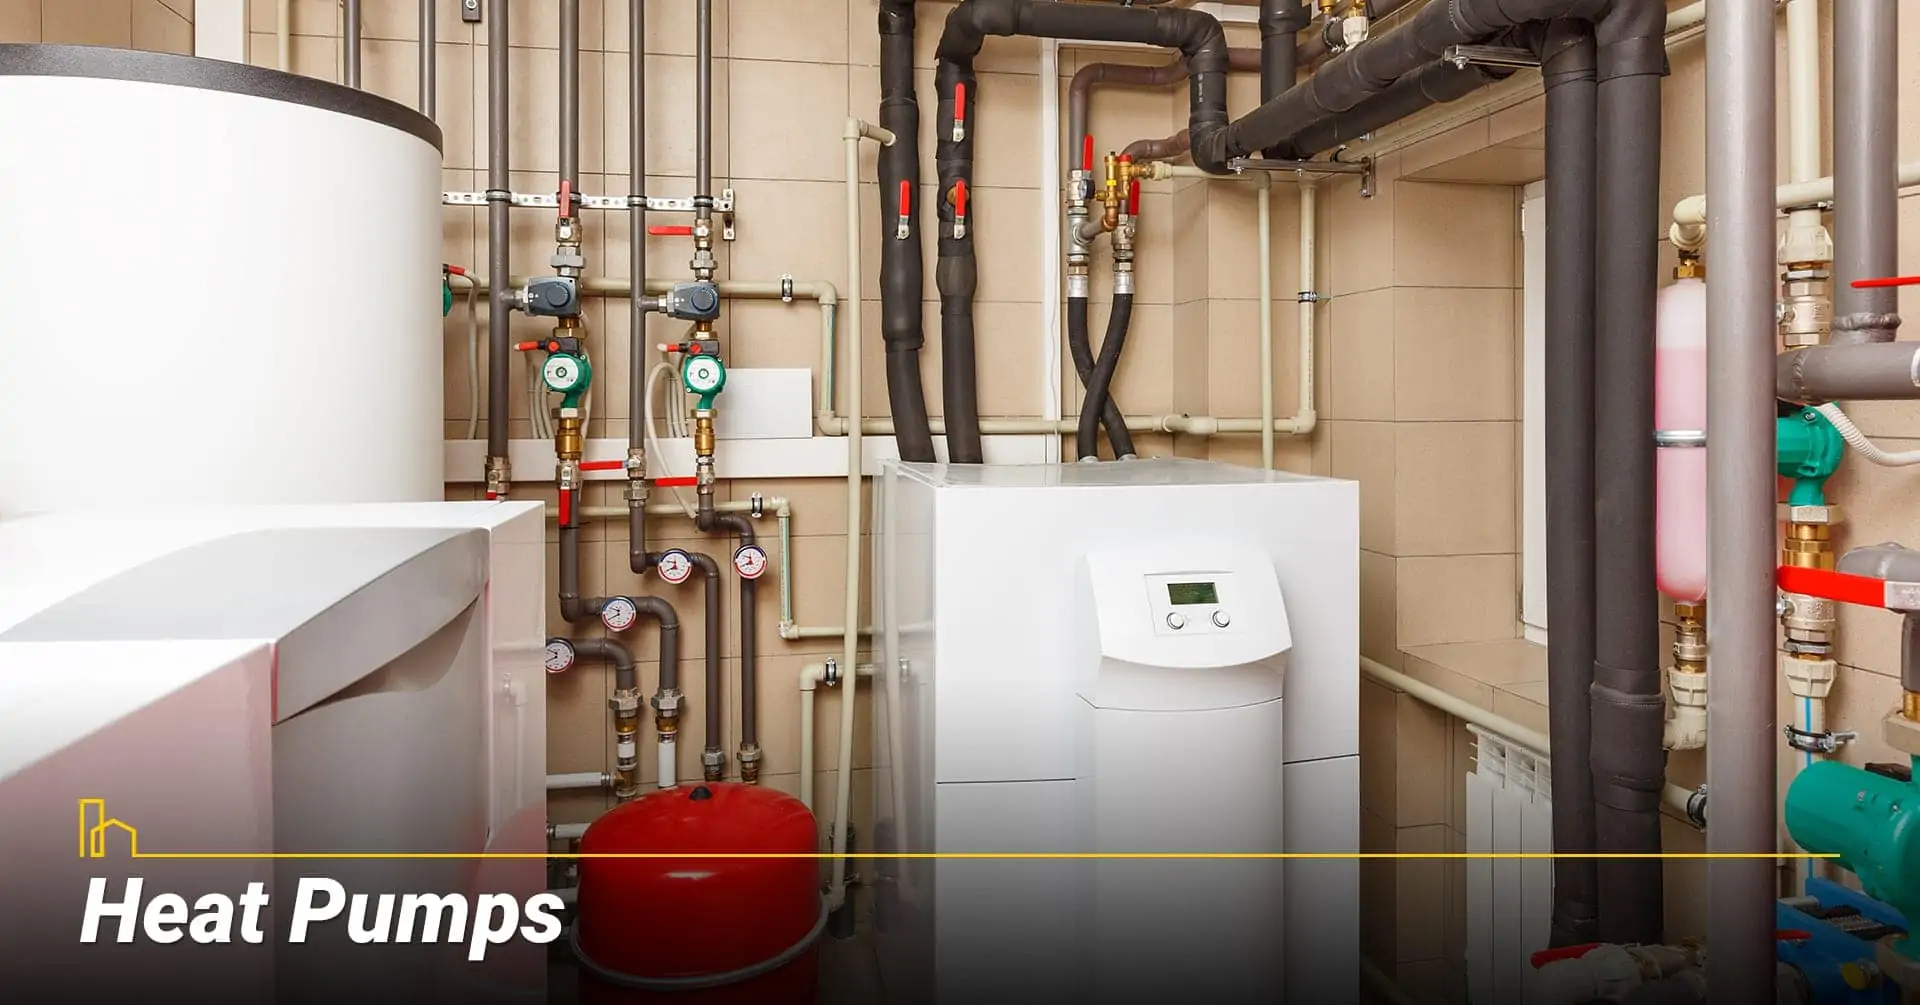 Heat Pumps, heat your home with heat pumps